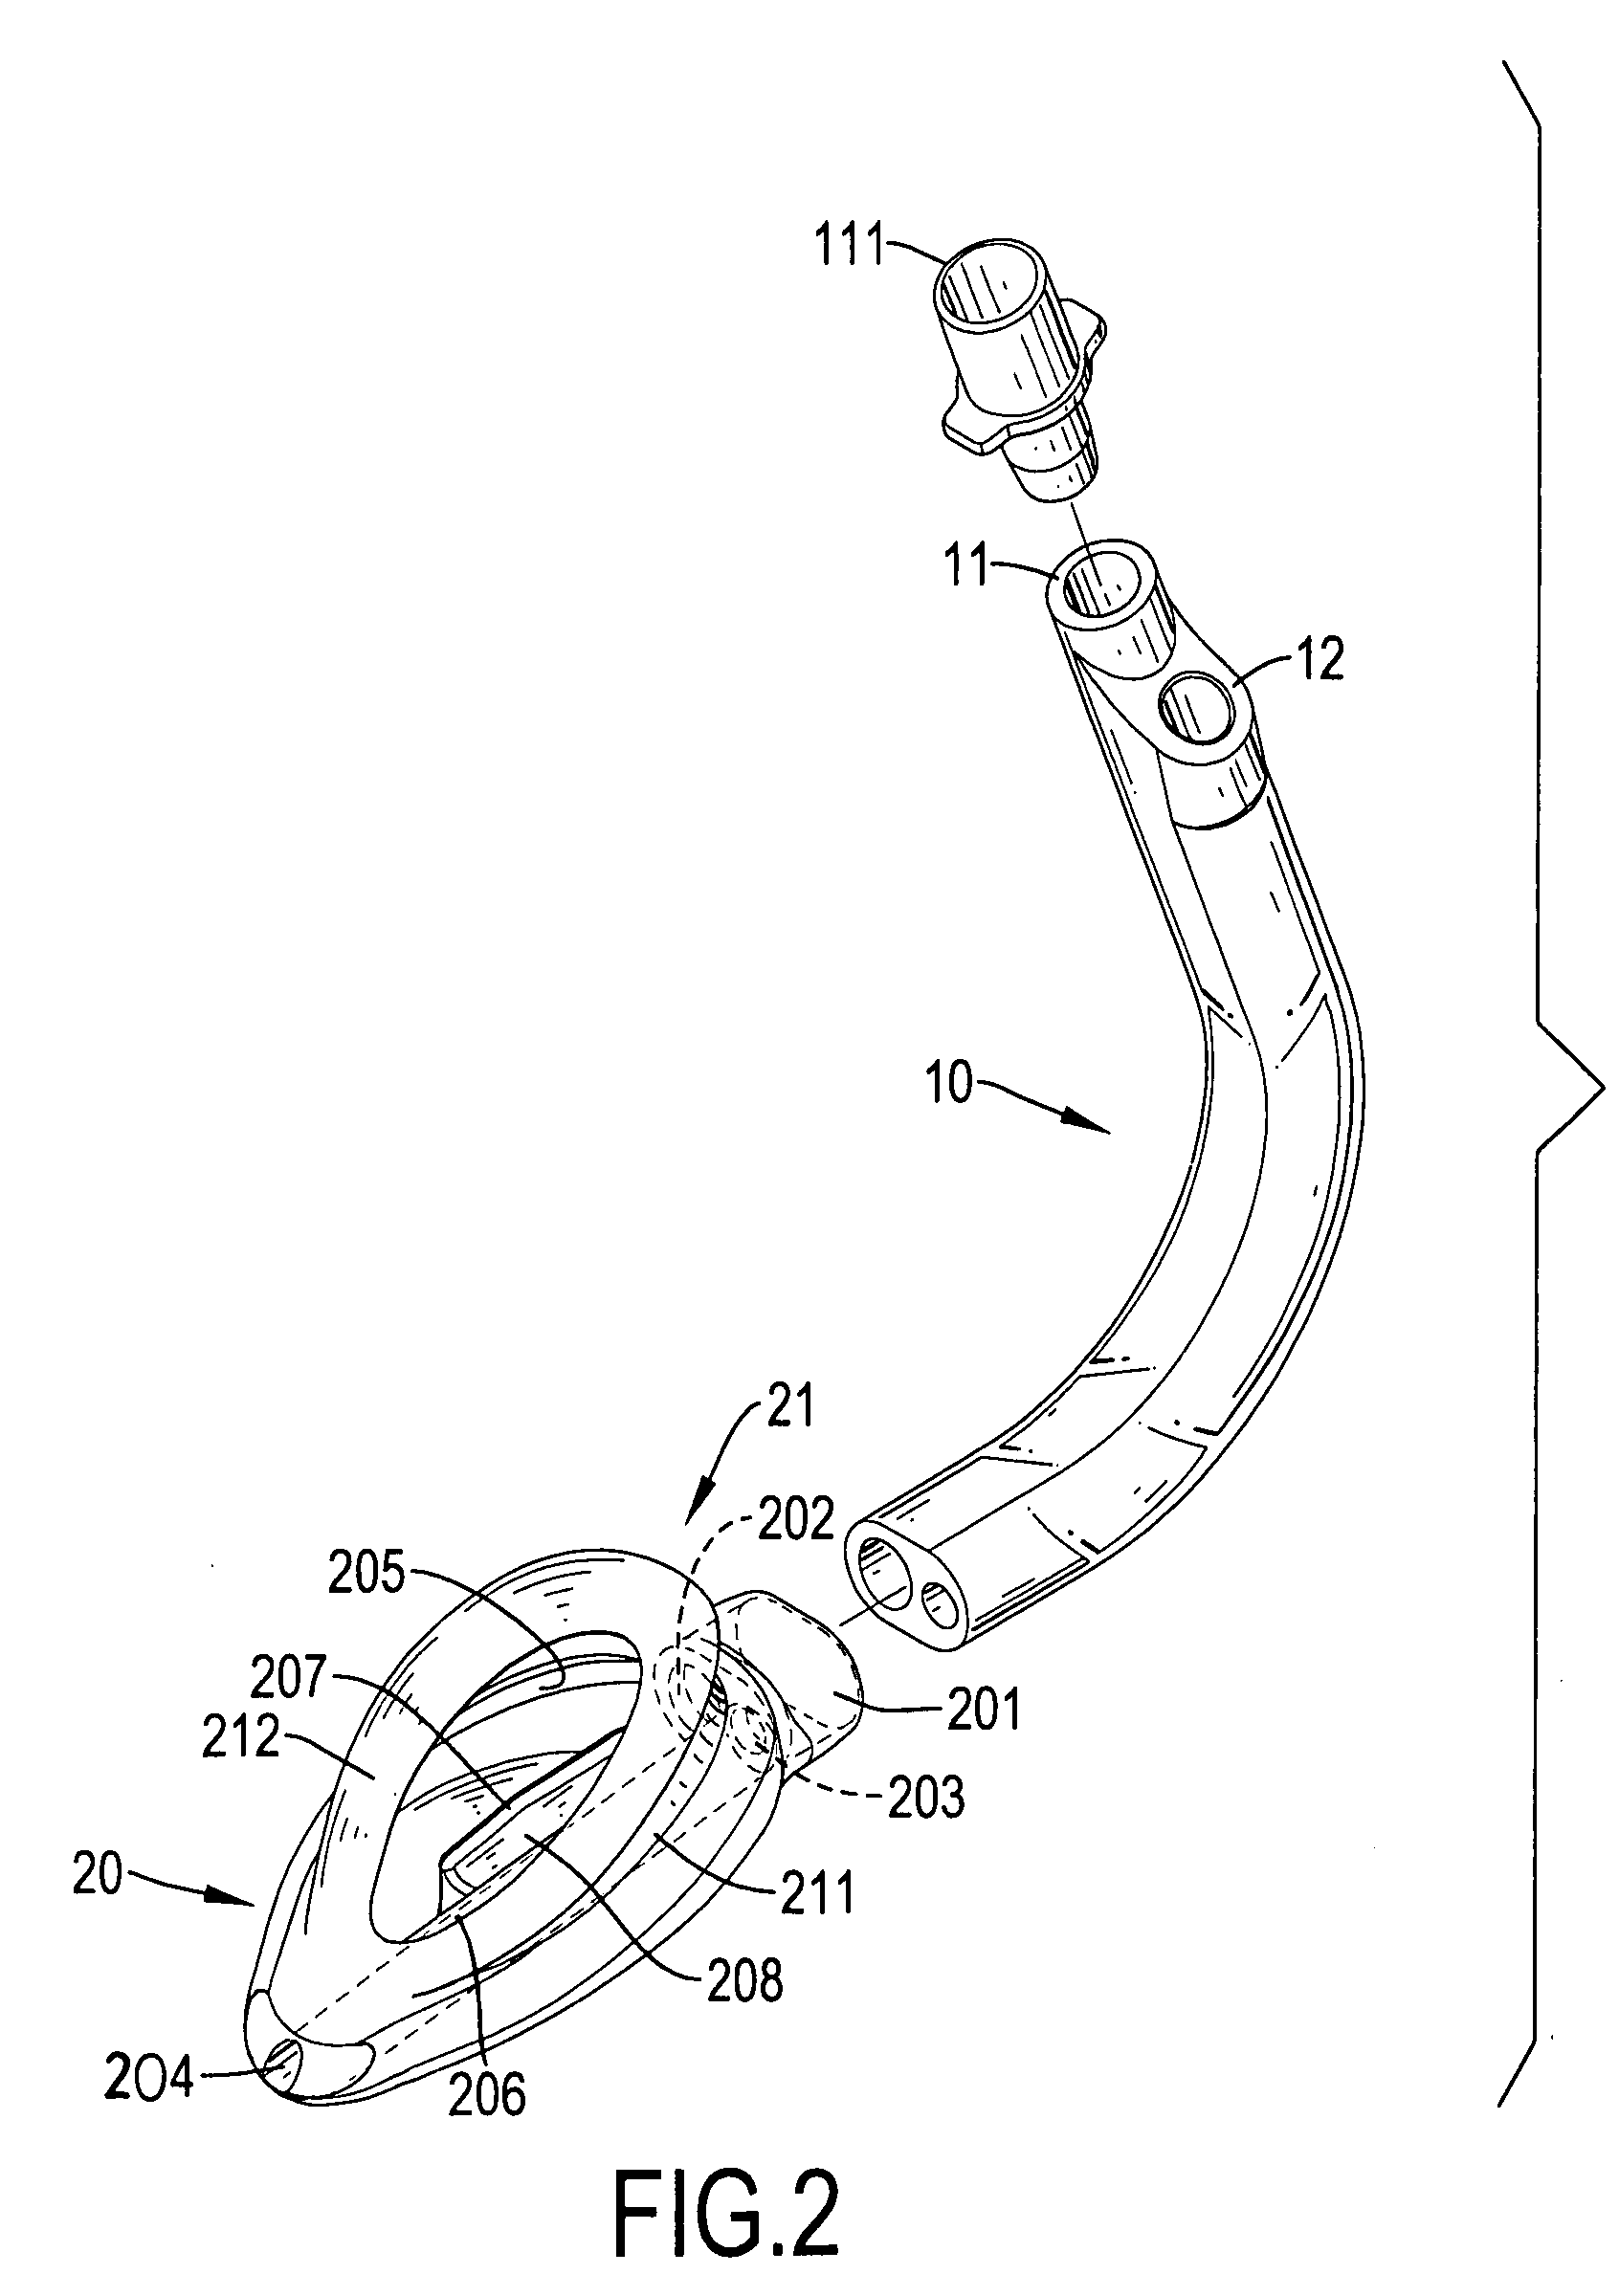 Laryngeal mask airway without inflating